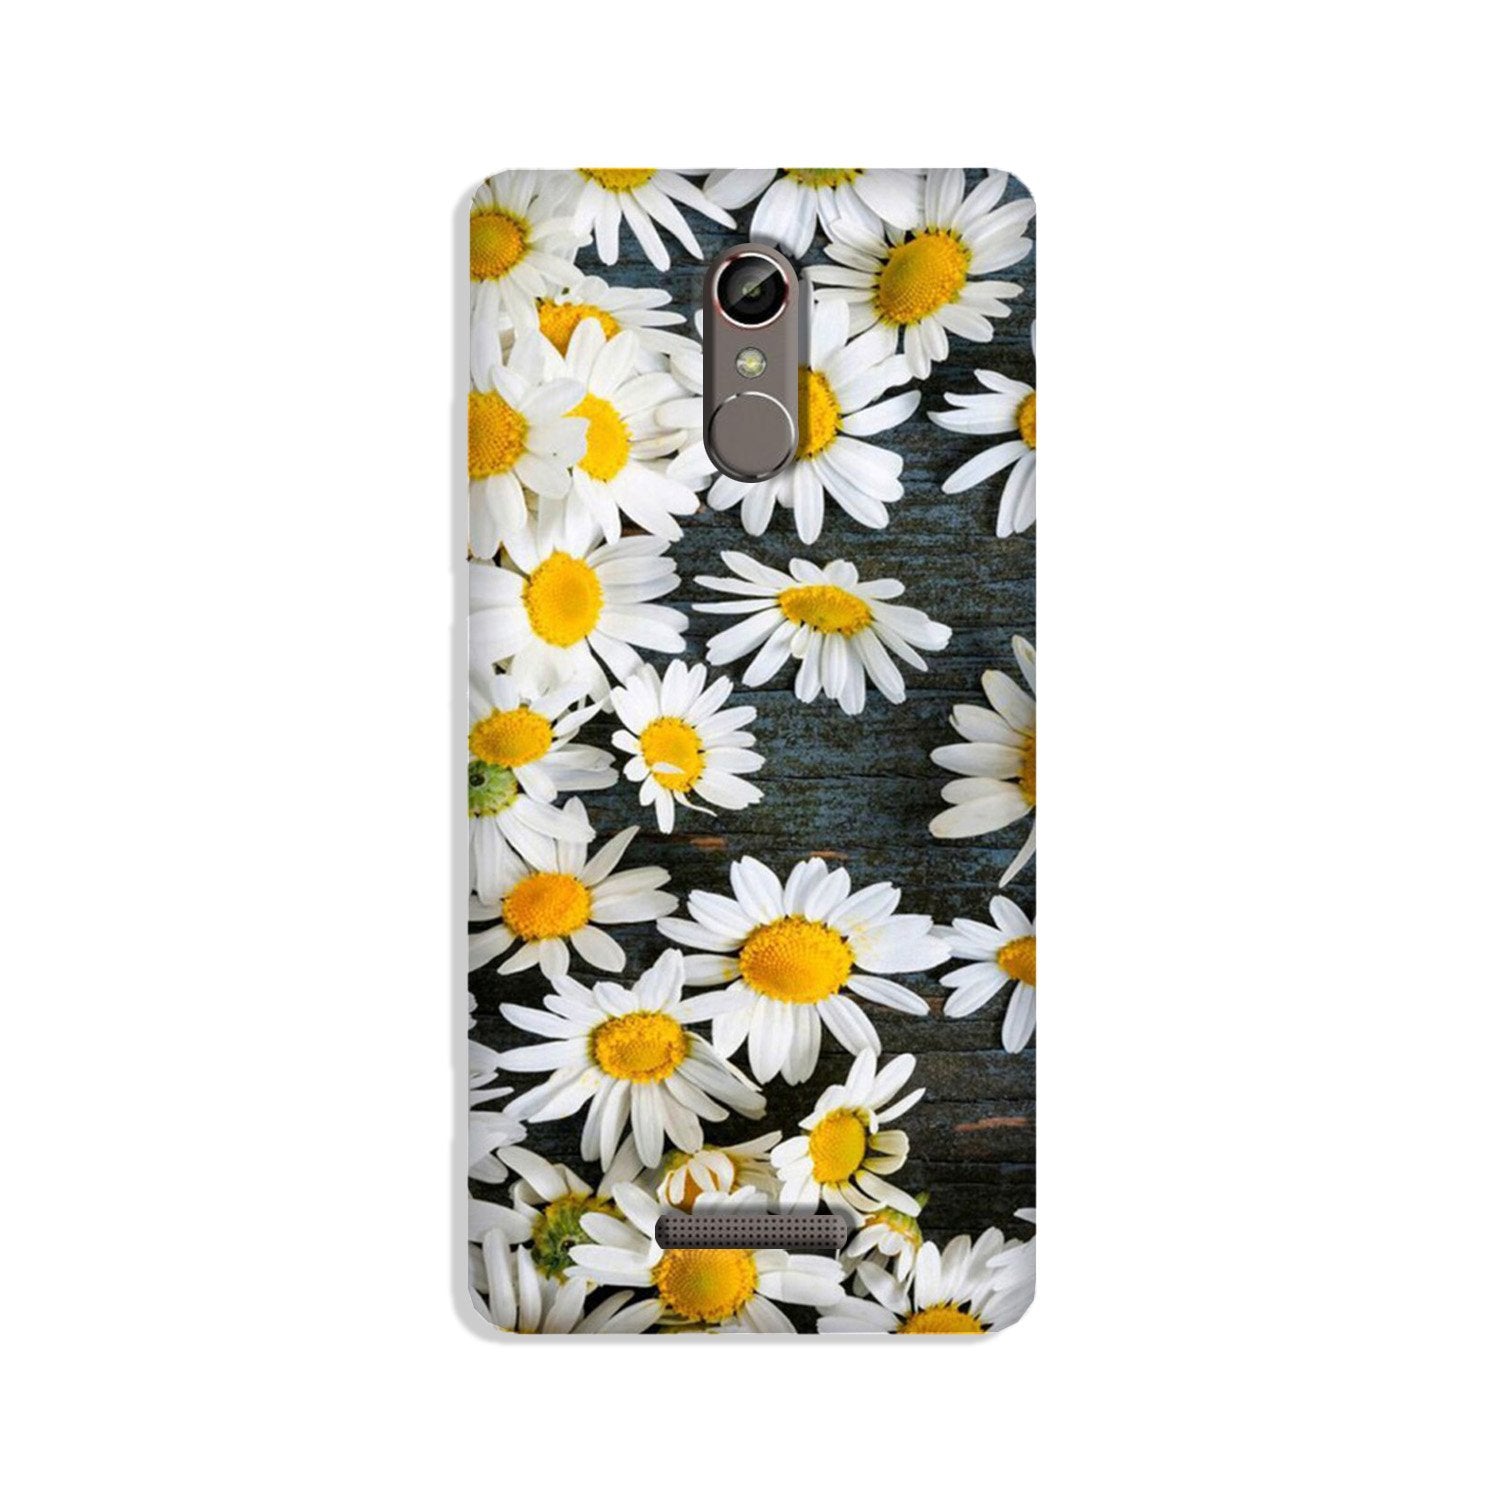 White flowers2 Case for Gionee S6s